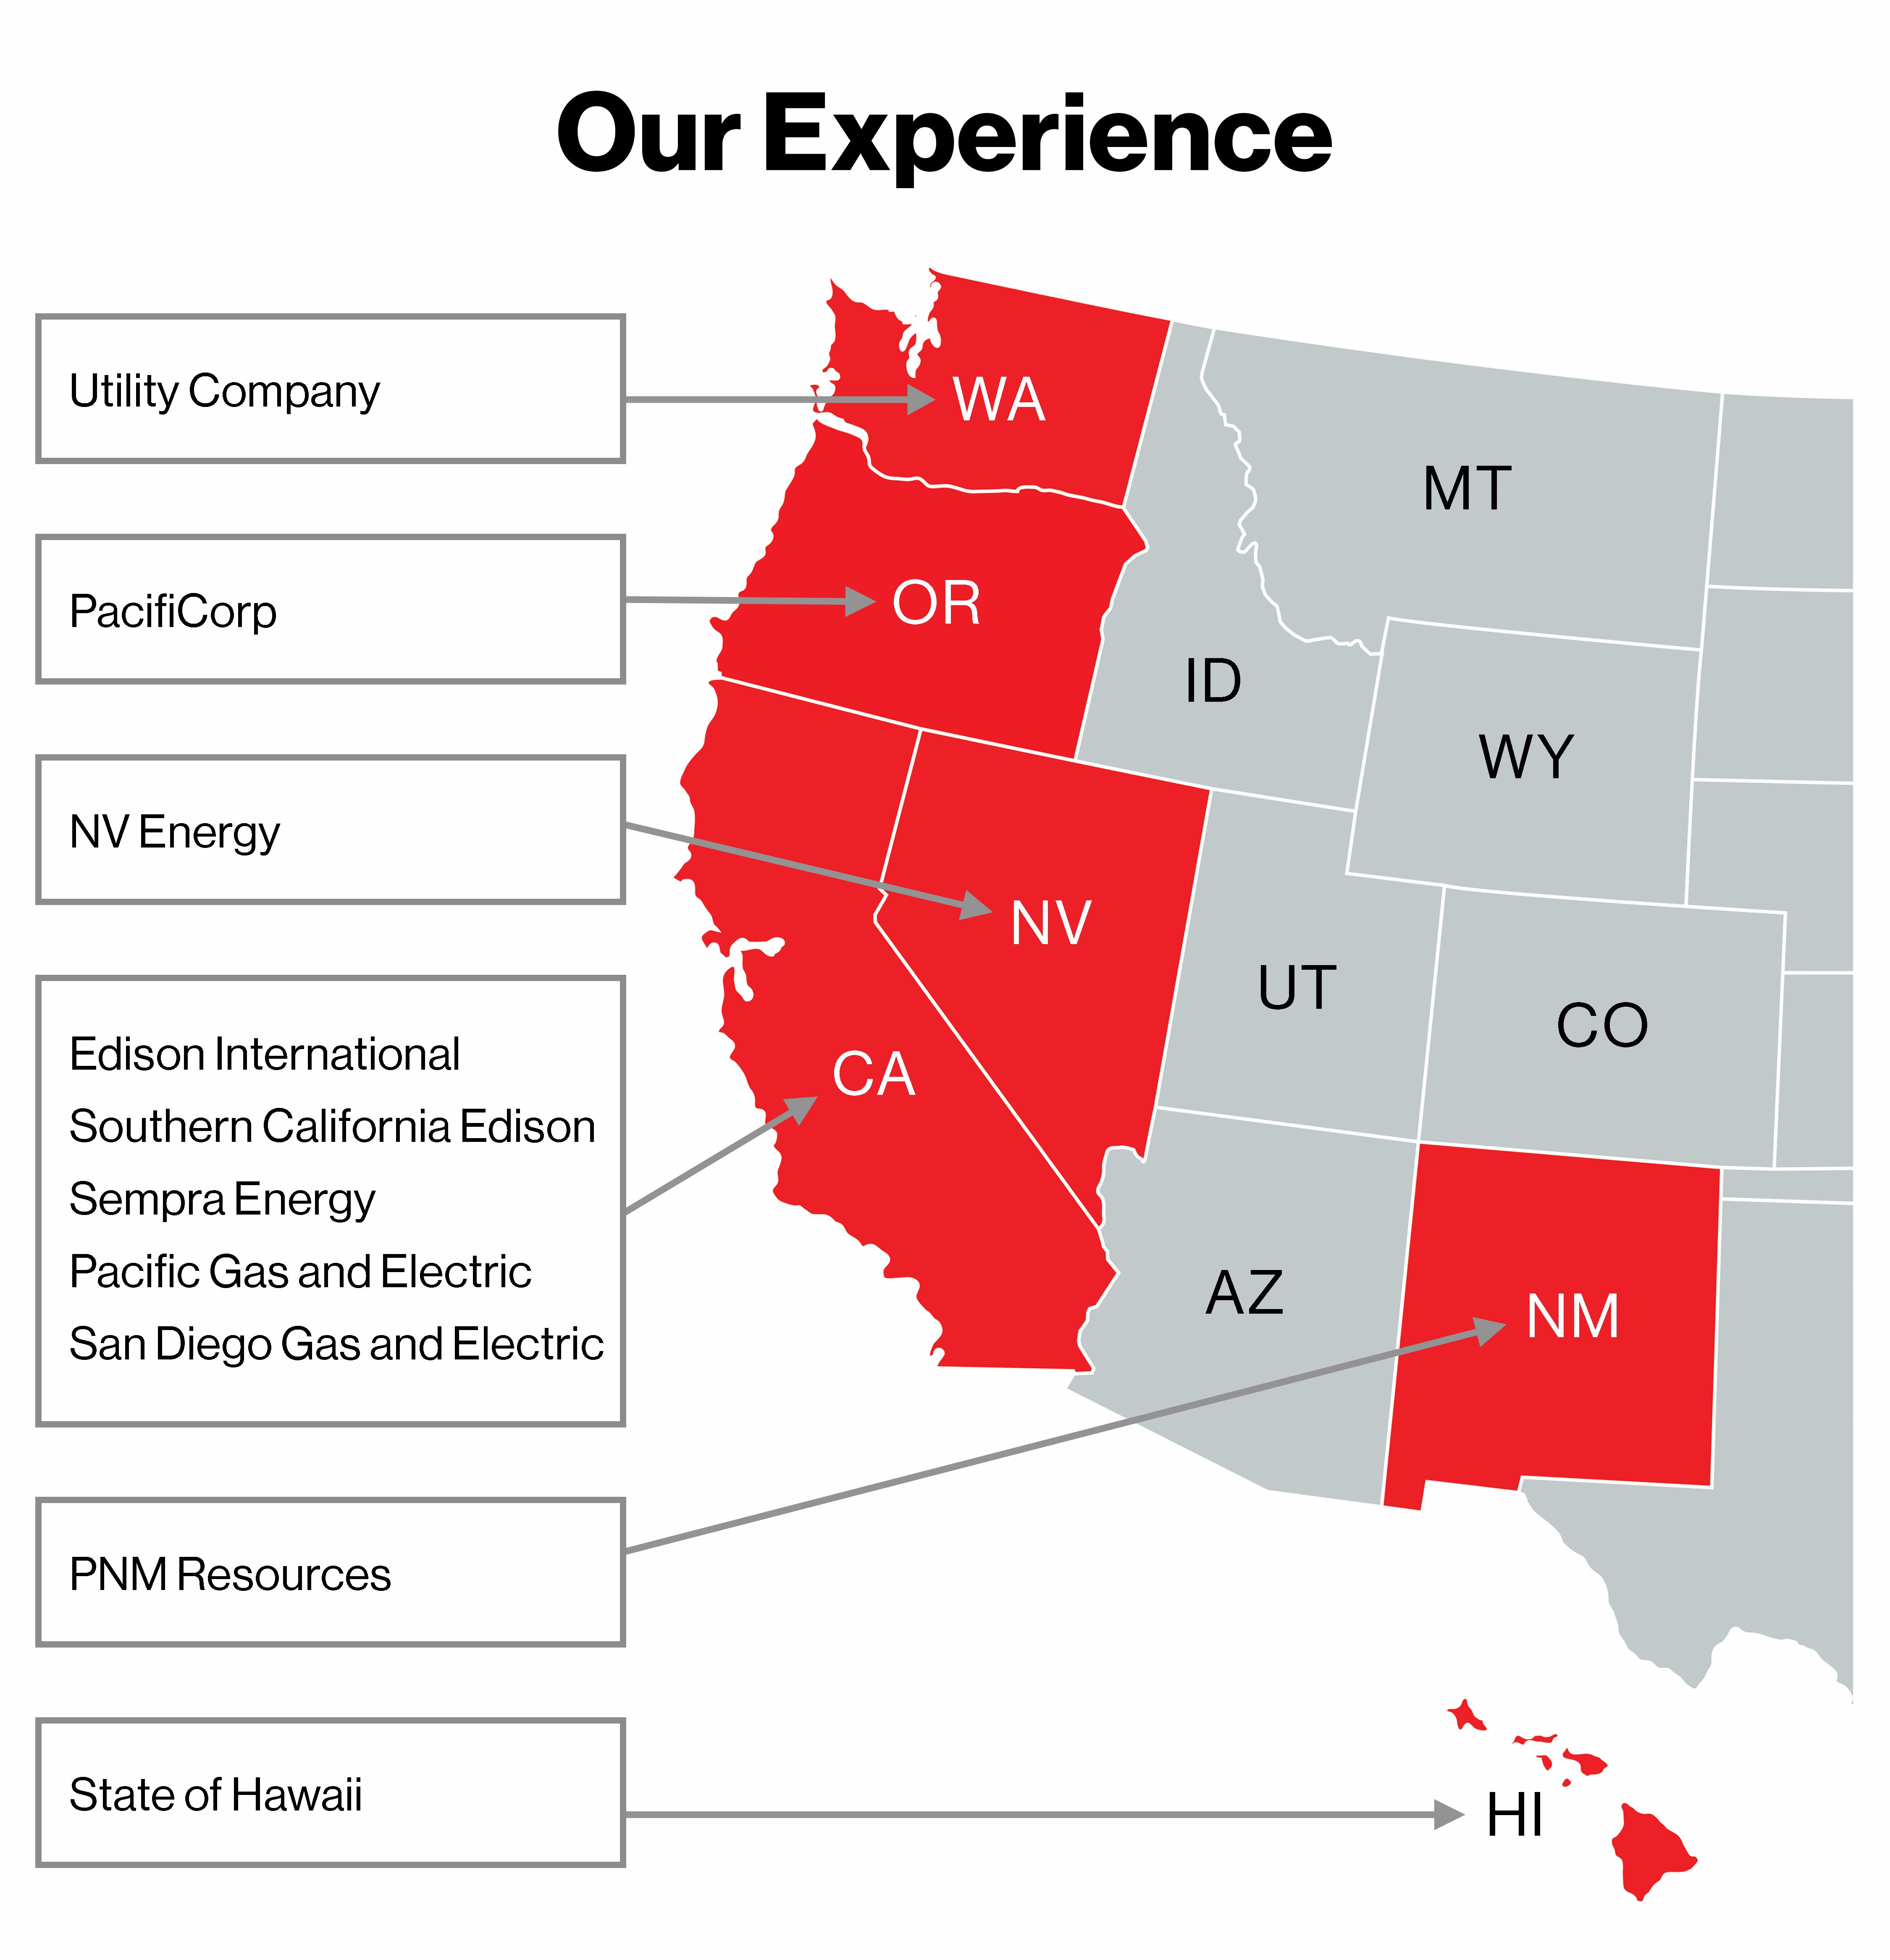 map of western United States and list of clients